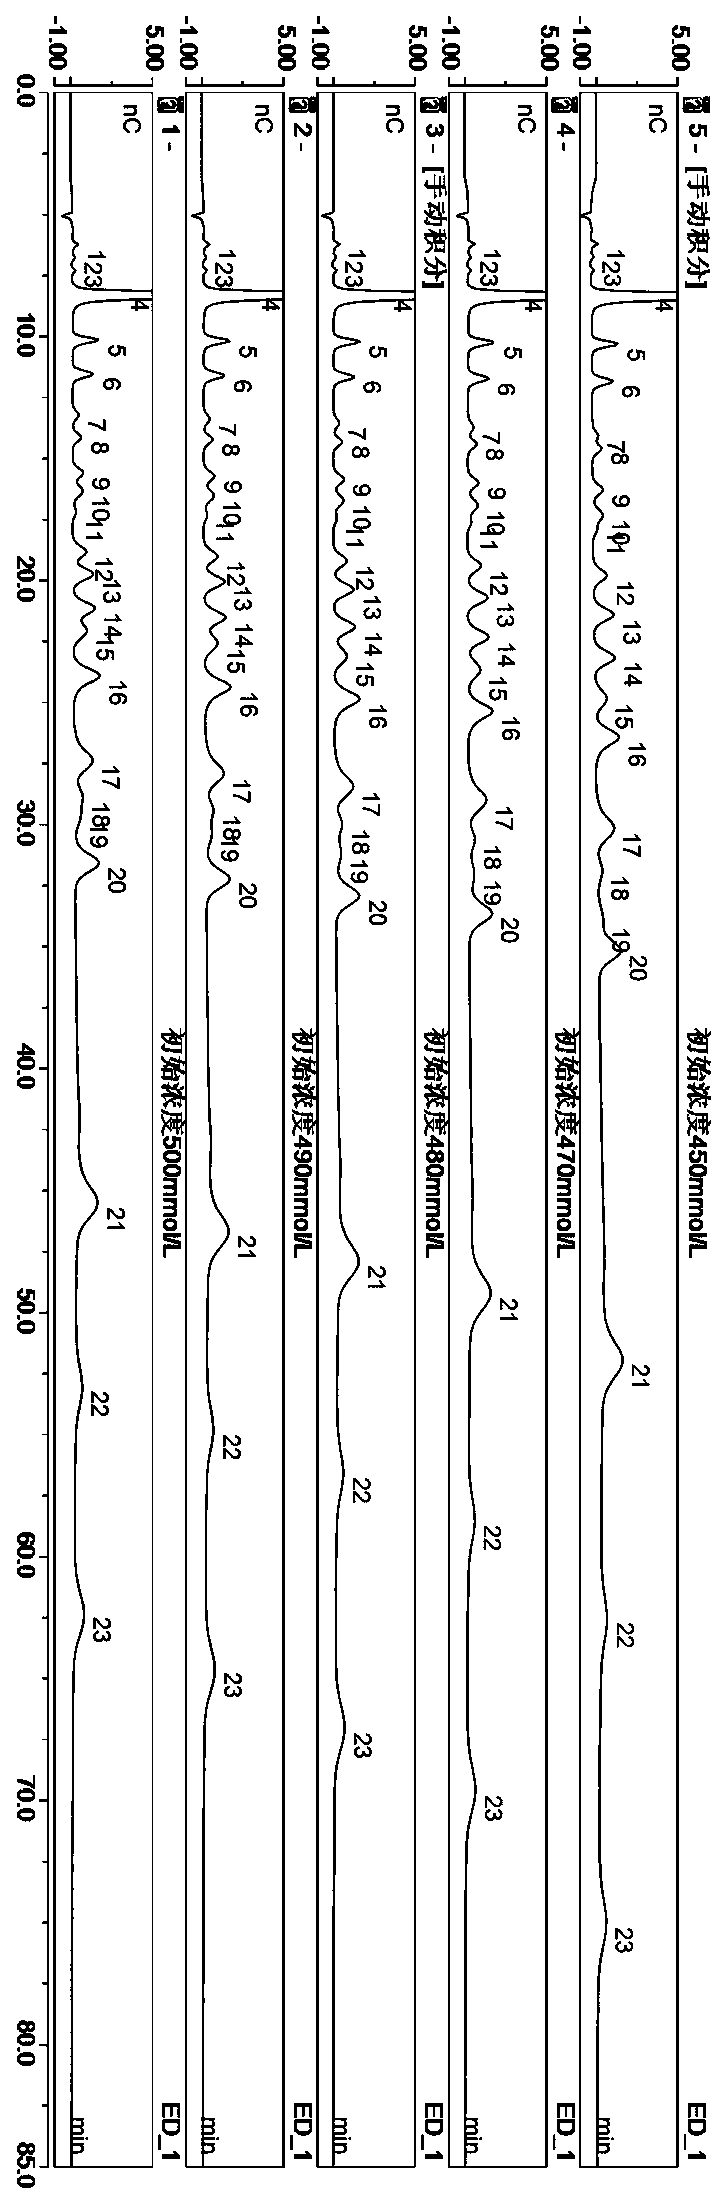 Method for simultaneous rapid detection of various sugars, sugar alcohols and alcohols in beer